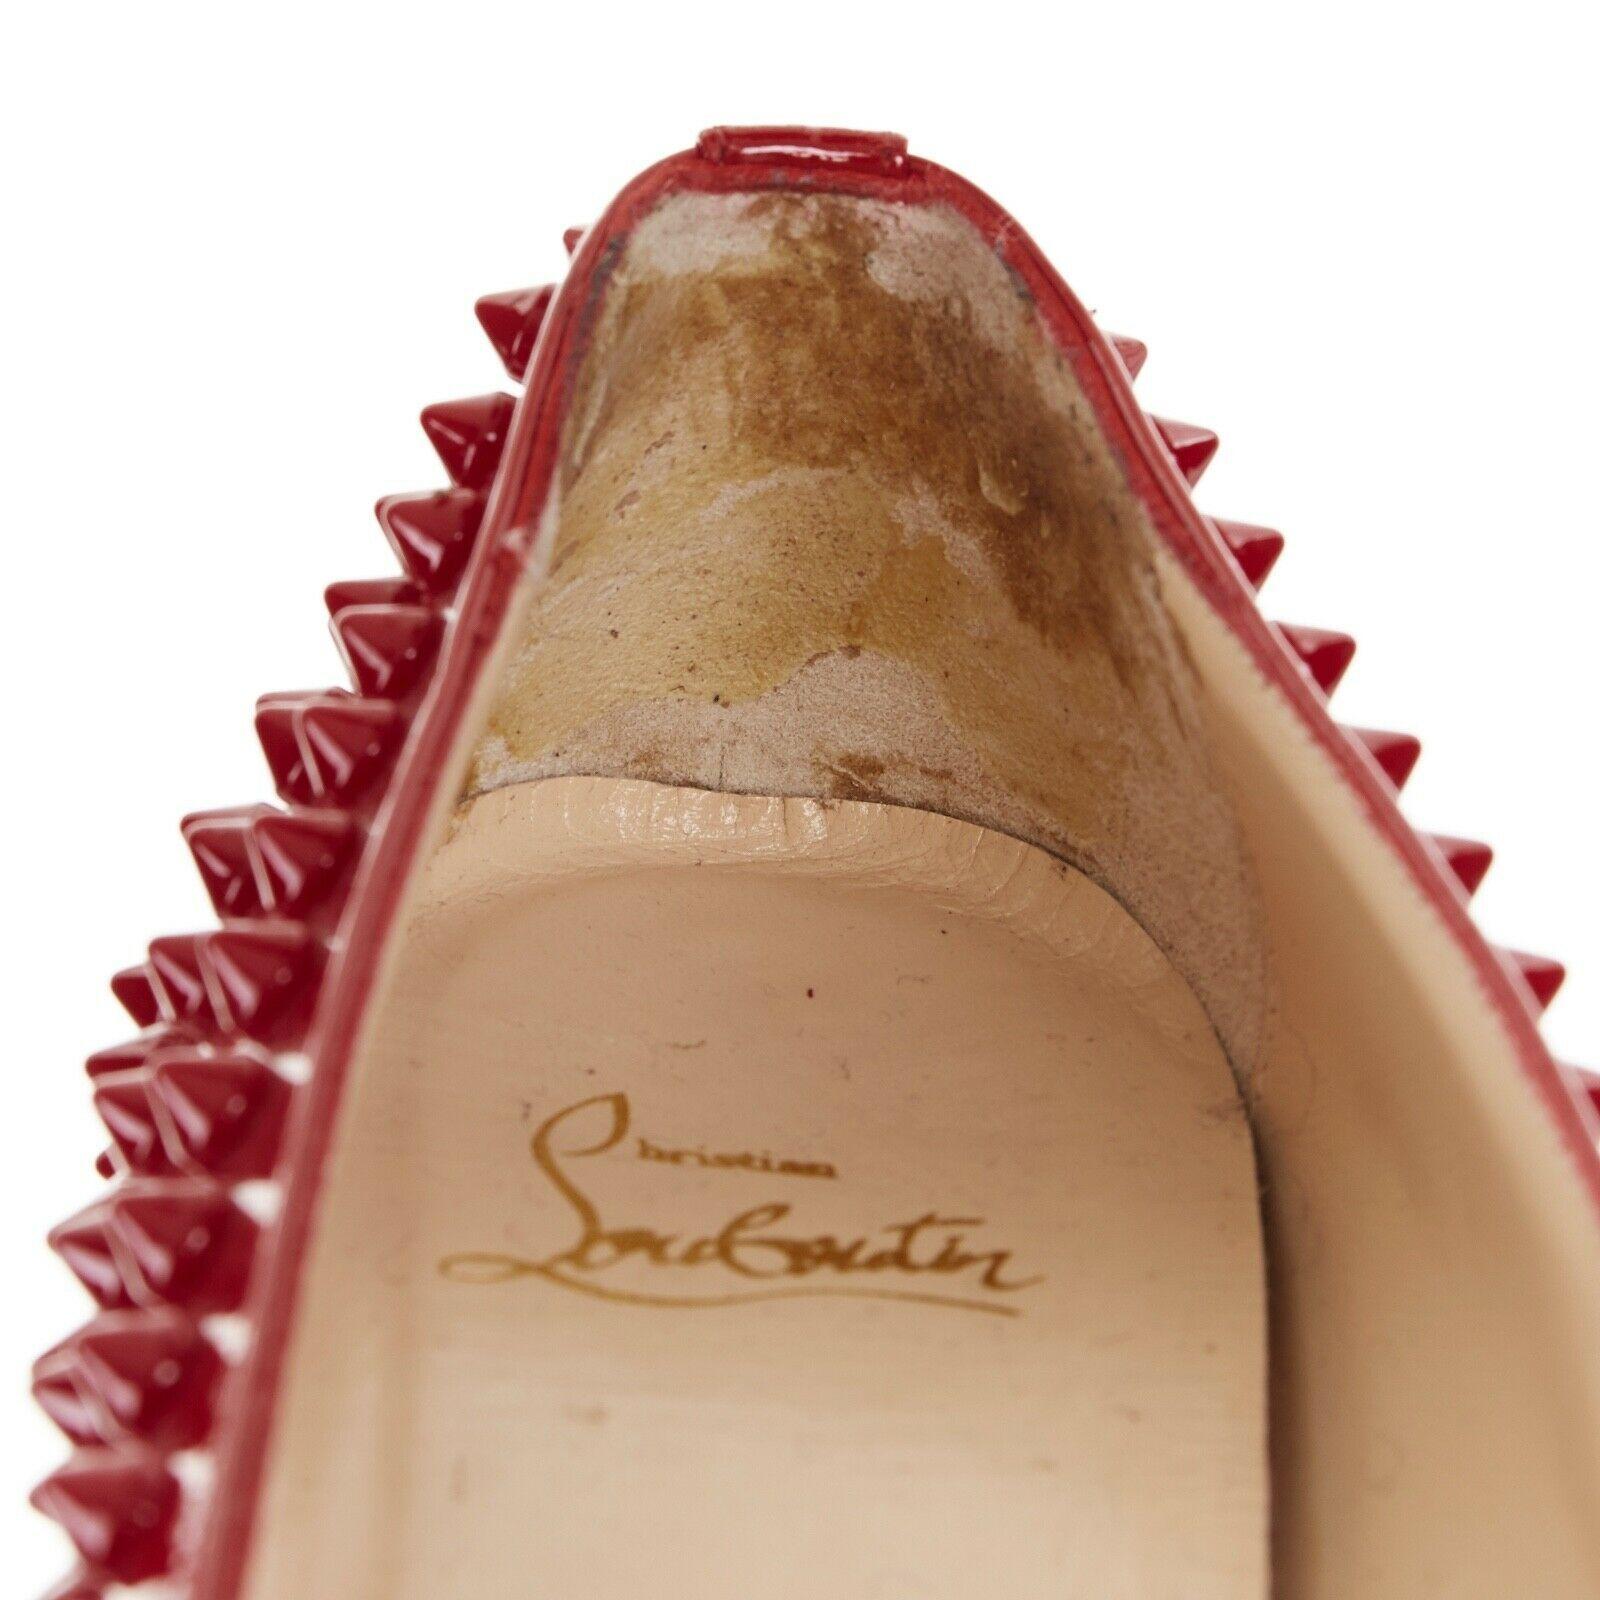 CHRISTIAN LOUBOUTIN Pigalle Spikes red patent studded pointy flats EU38.5 2